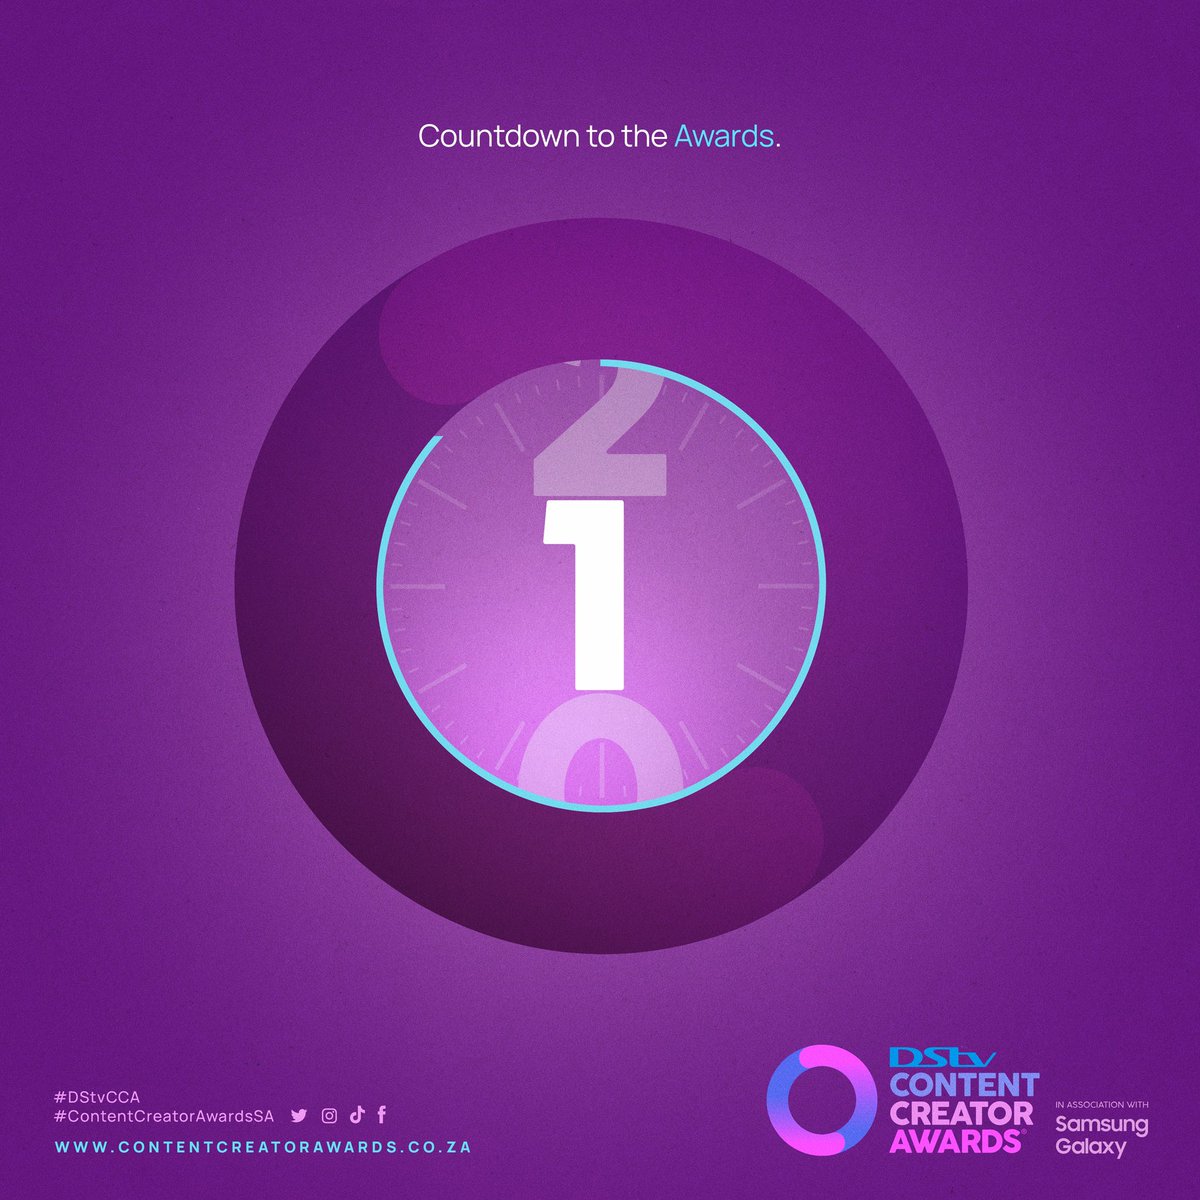 ONE MORE sleep until we celebrate our favourite creators at the 2023 #DStvContentCreatorAwards 💃🕺 Stay tuned to the DStv, and @ContentAwardsSA social pages for more!